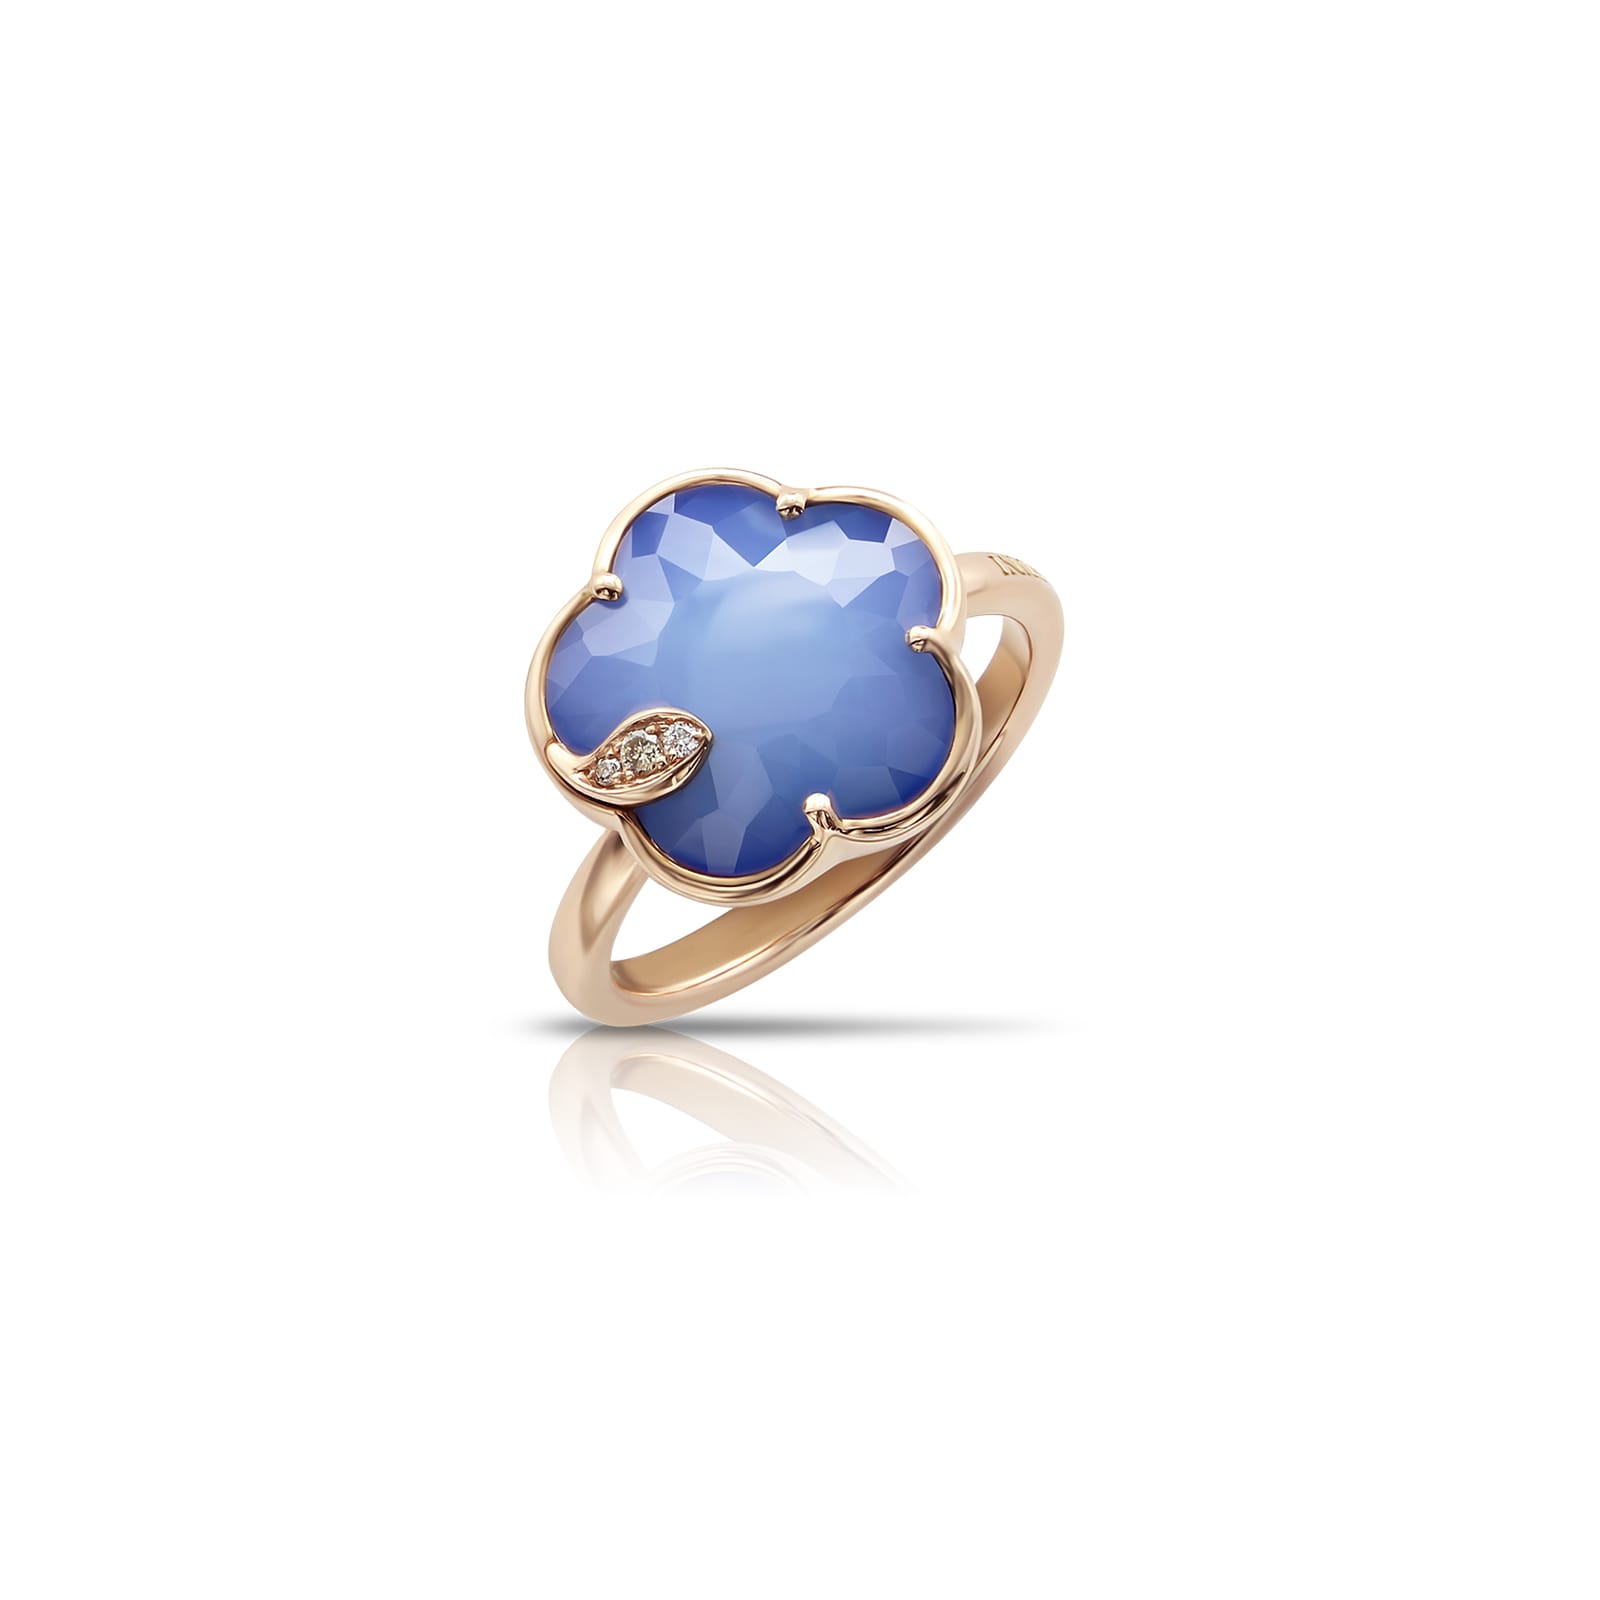 Petit Joli Ring in 18ct Rose Gold with Blue Moon and Diamonds - Ring Size M